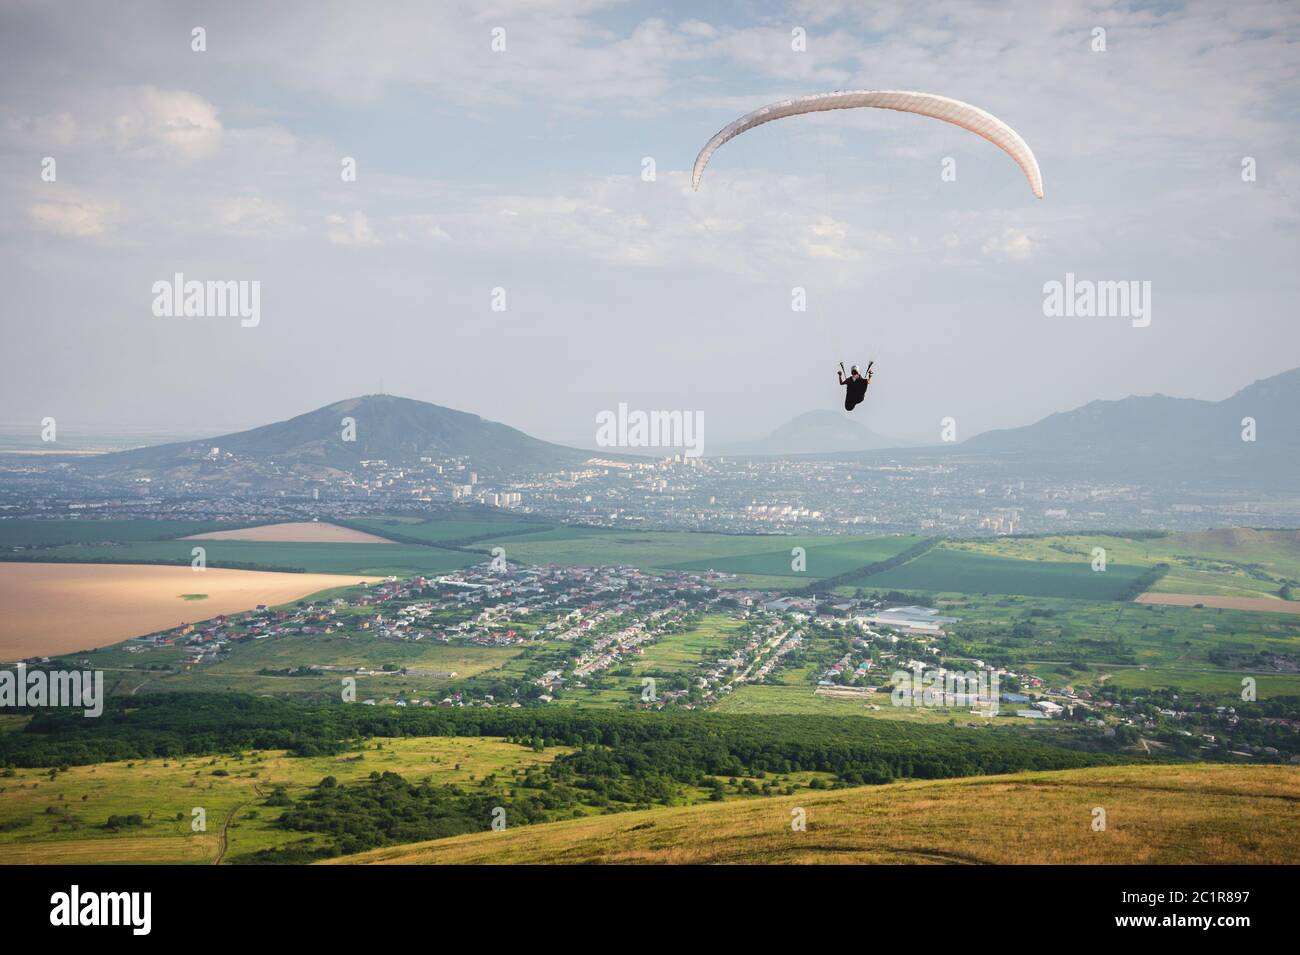 Professional paraglider in a cocoon suit flies high above the ground against the sky and fields with mountains Stock Photo